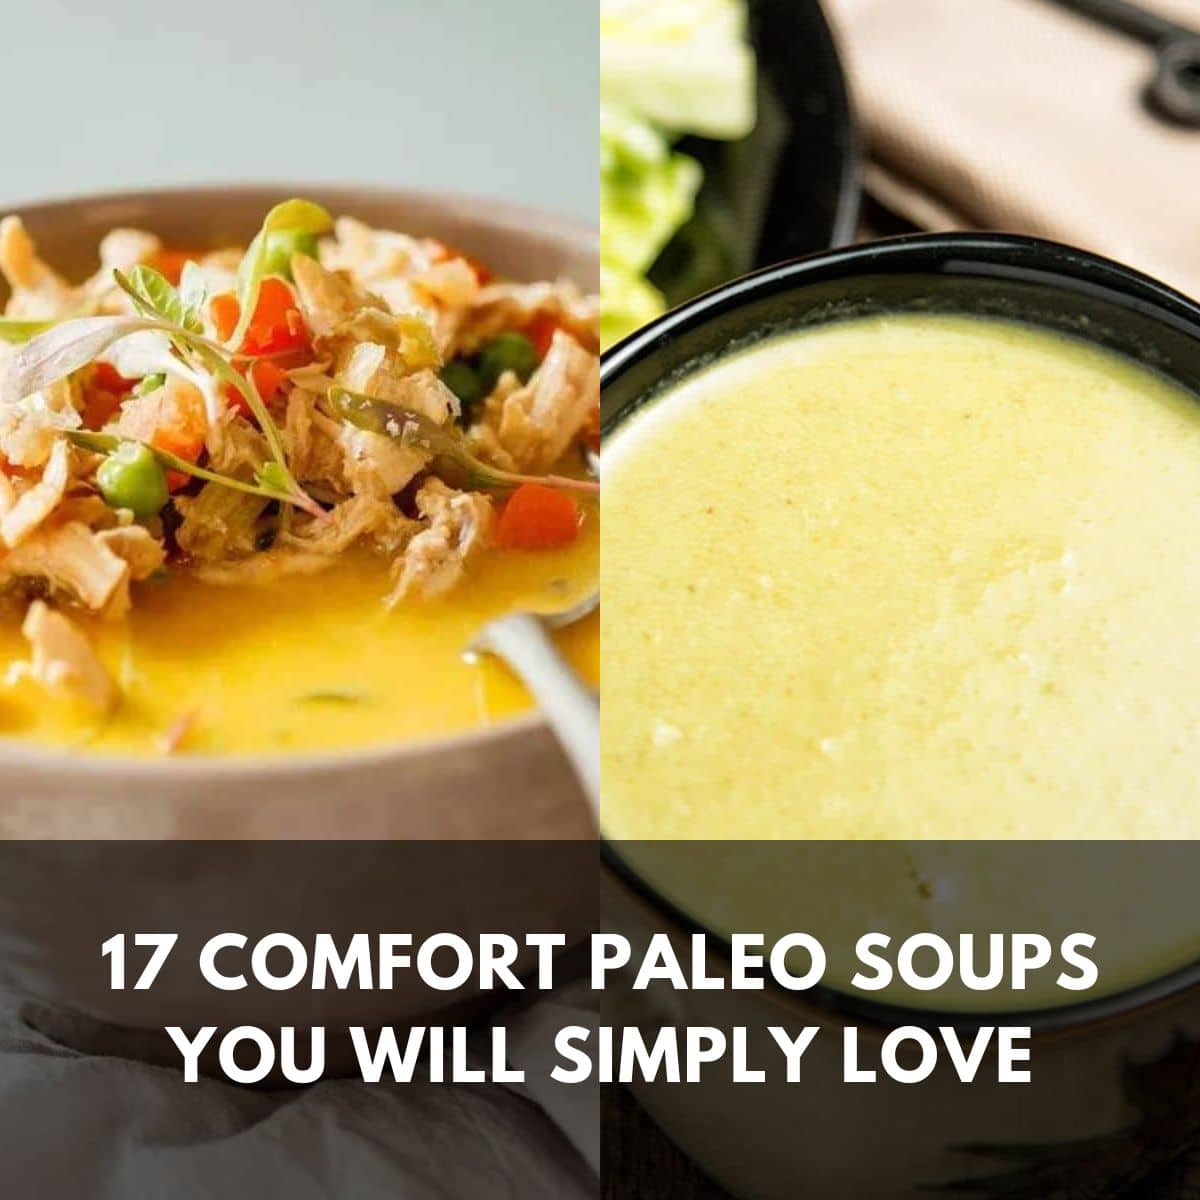 17 comfort paleo soups you will simply love main